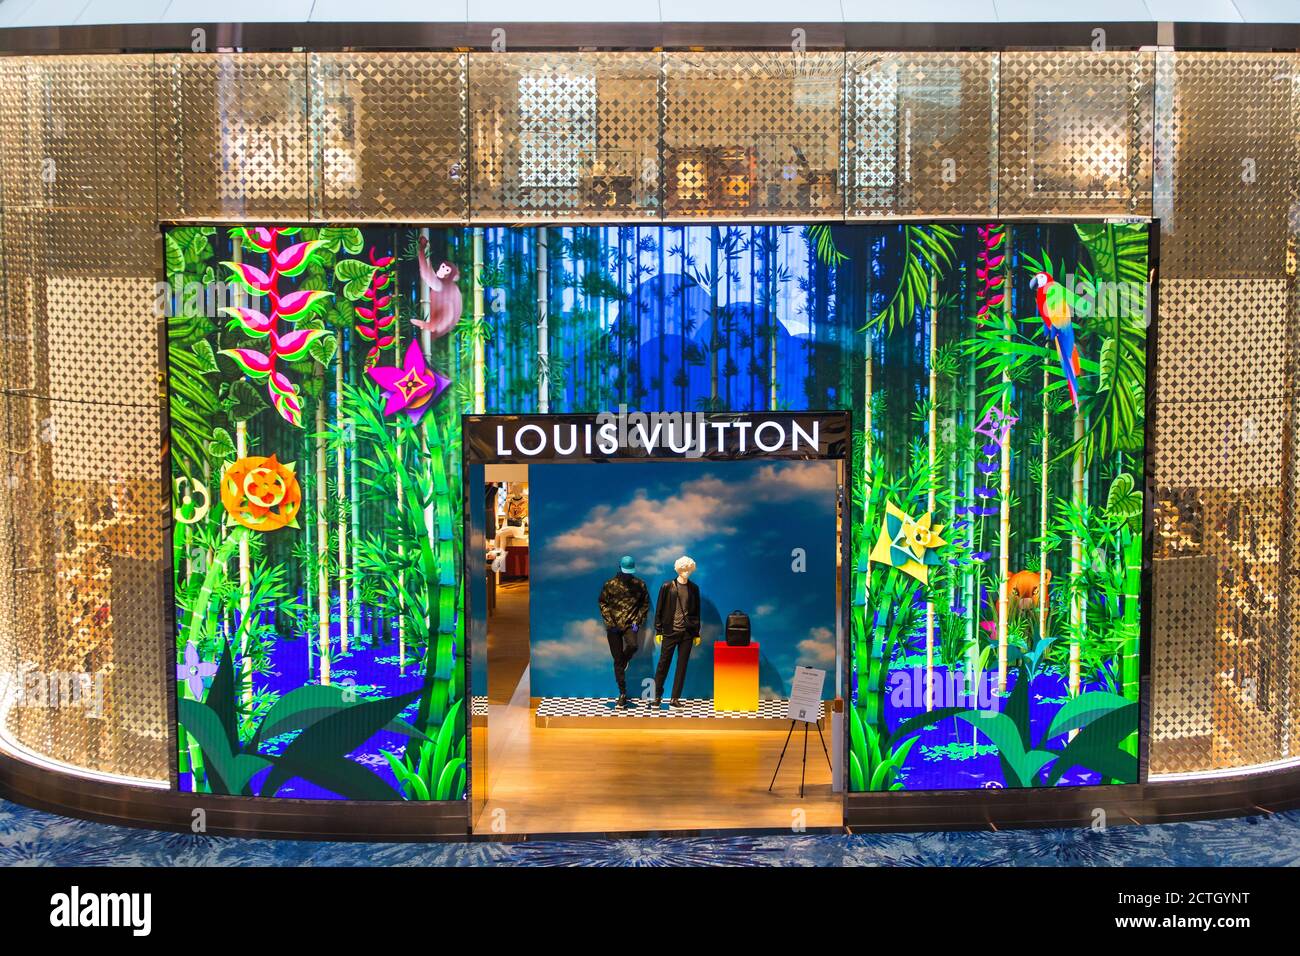 The Louis Vuitton Store, Changi Airport, Singapore, South East